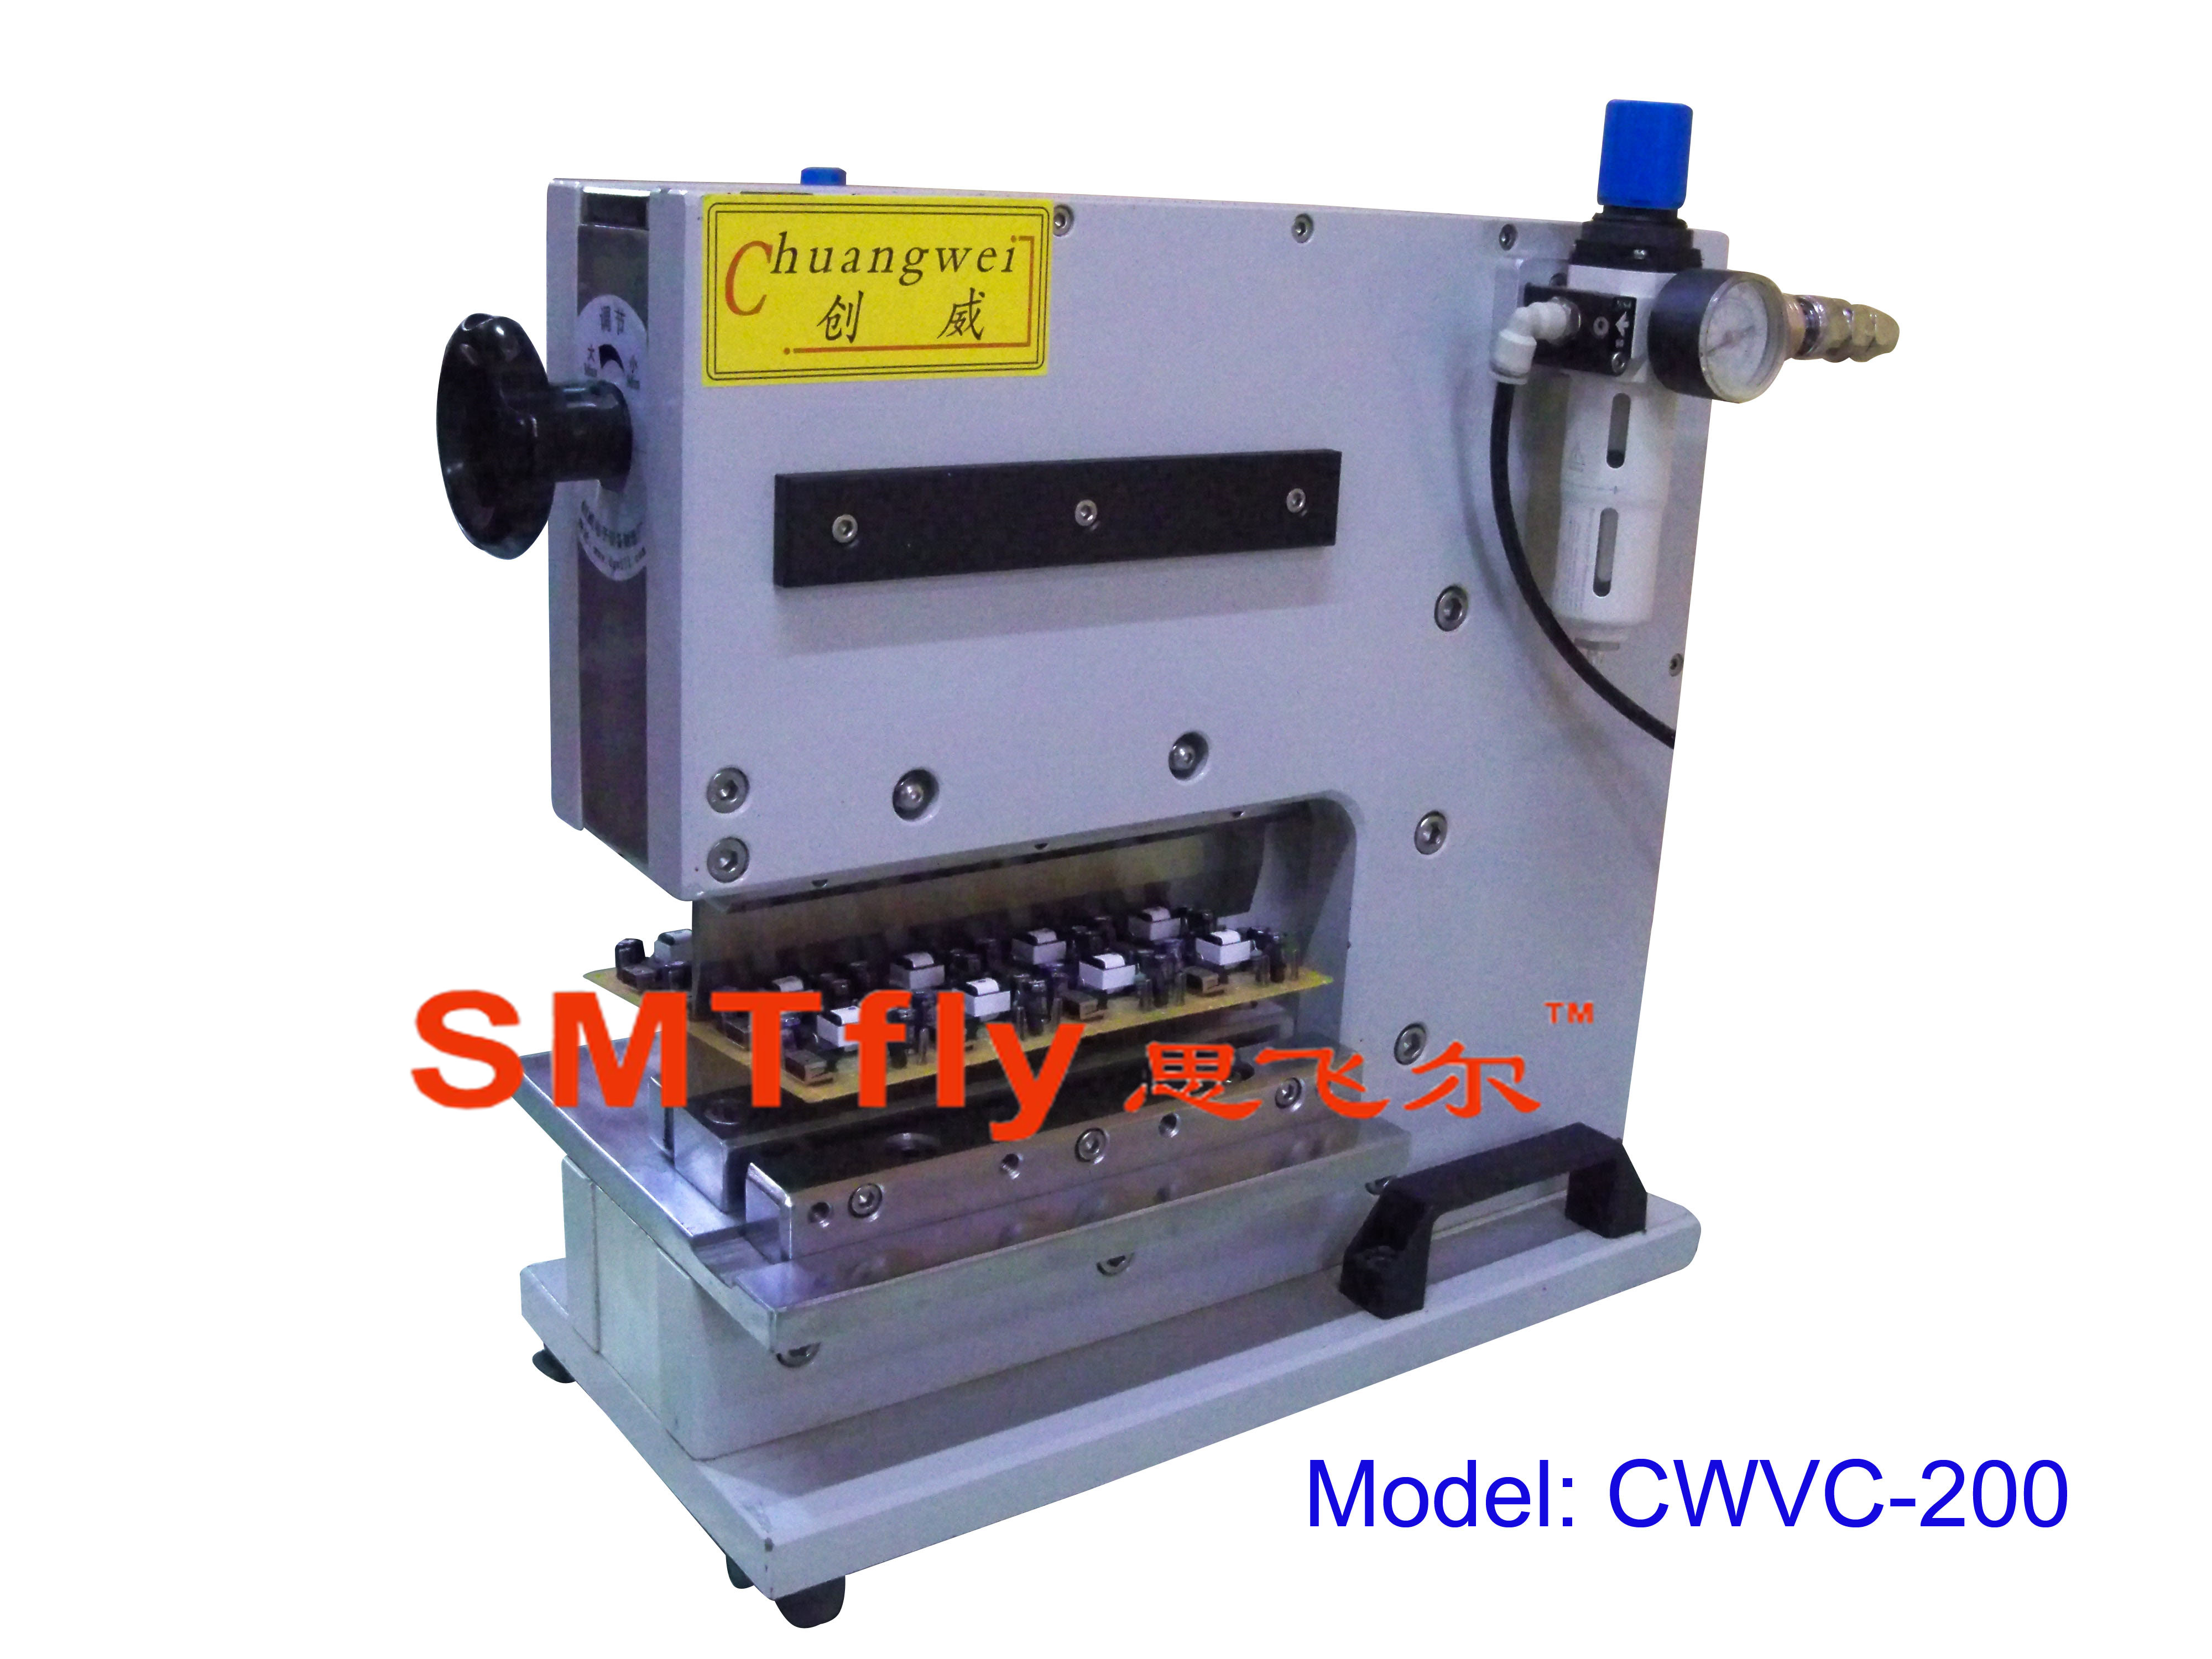 Connector PCB Cutter,SMTfly-200J